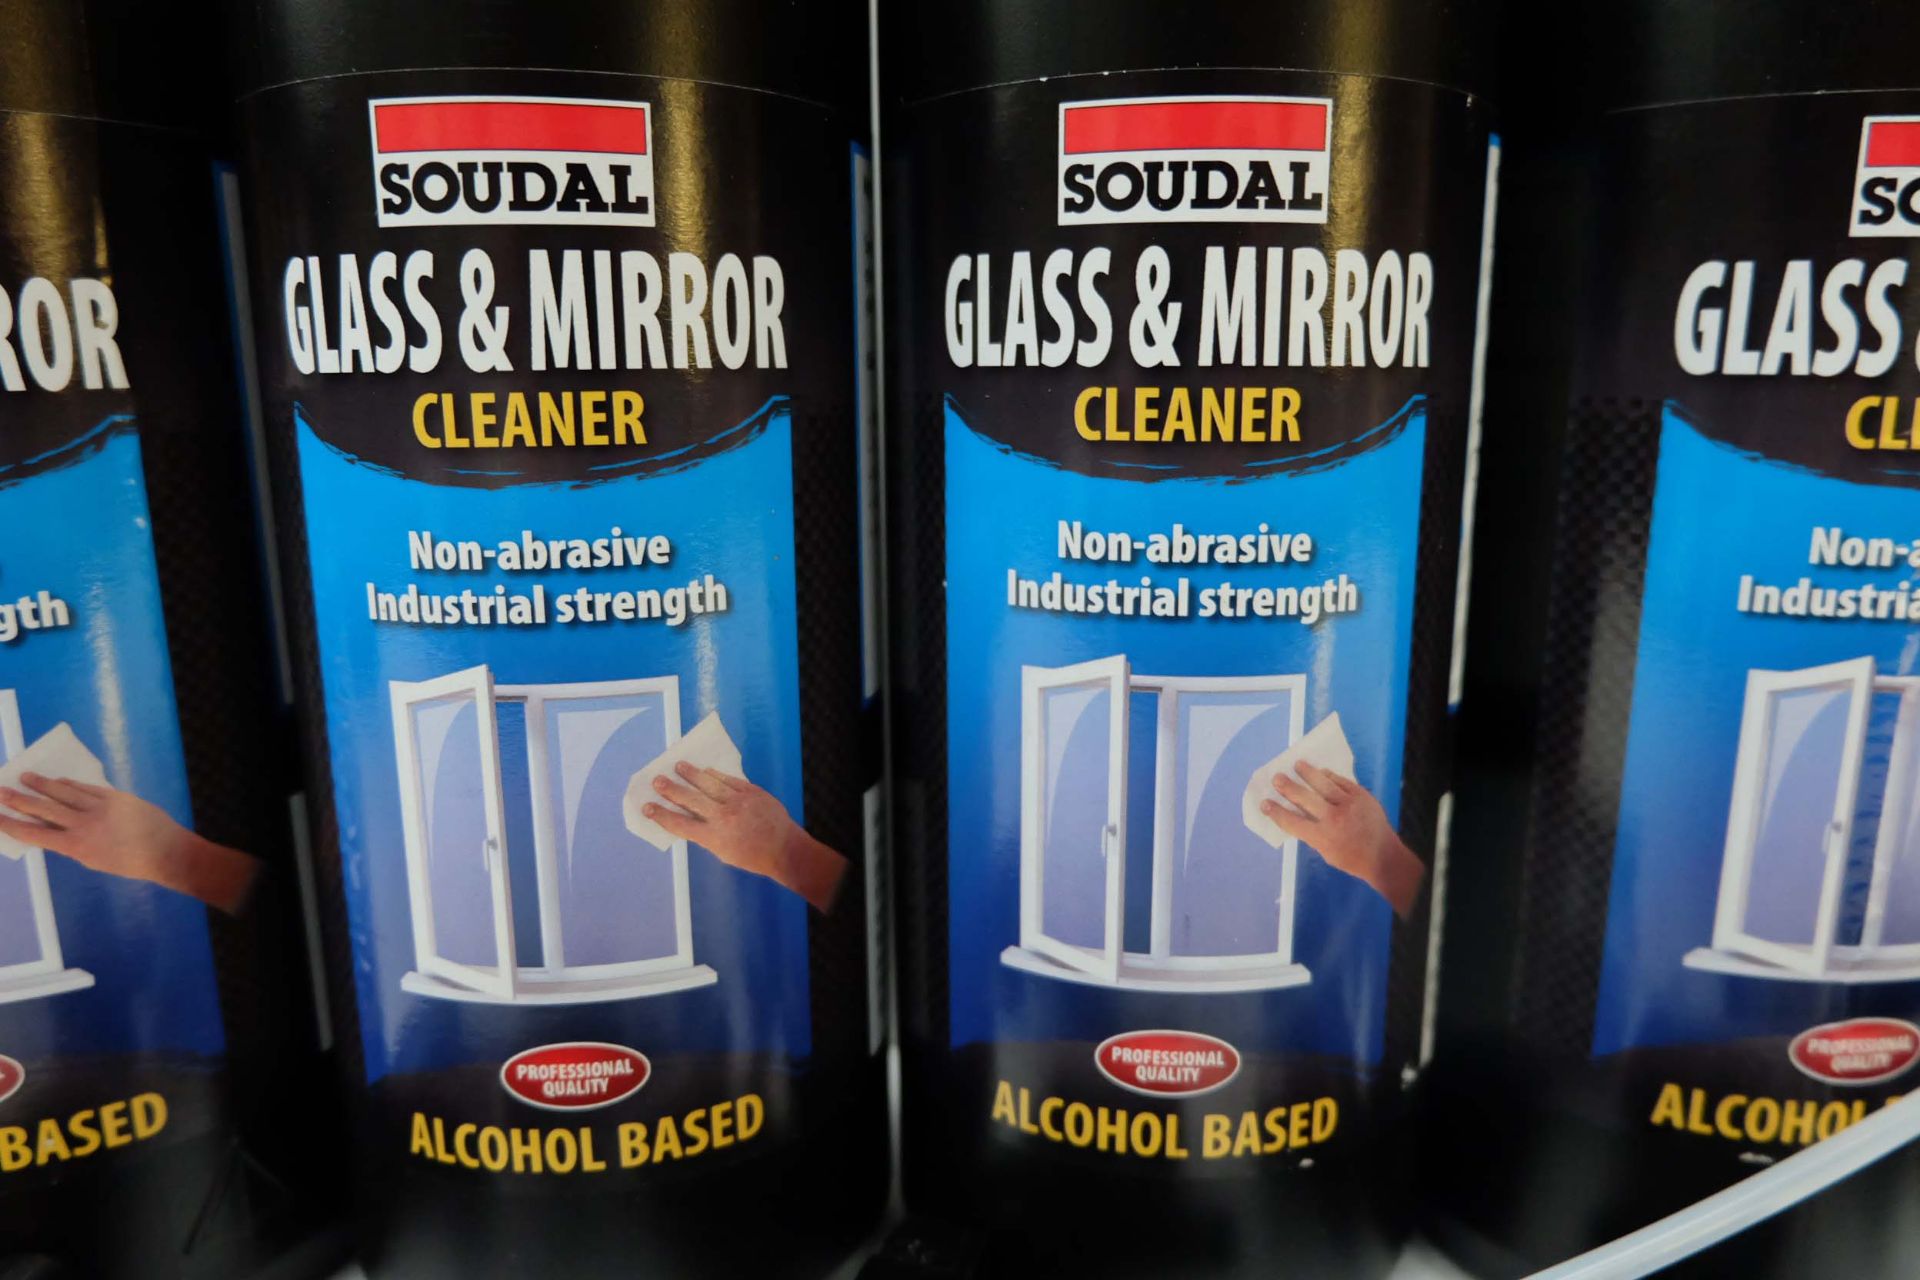 6 x 1 Ltr Bottle of Soudal Glass & Mirror Cleaner With Spray Nozzles. - Image 2 of 5